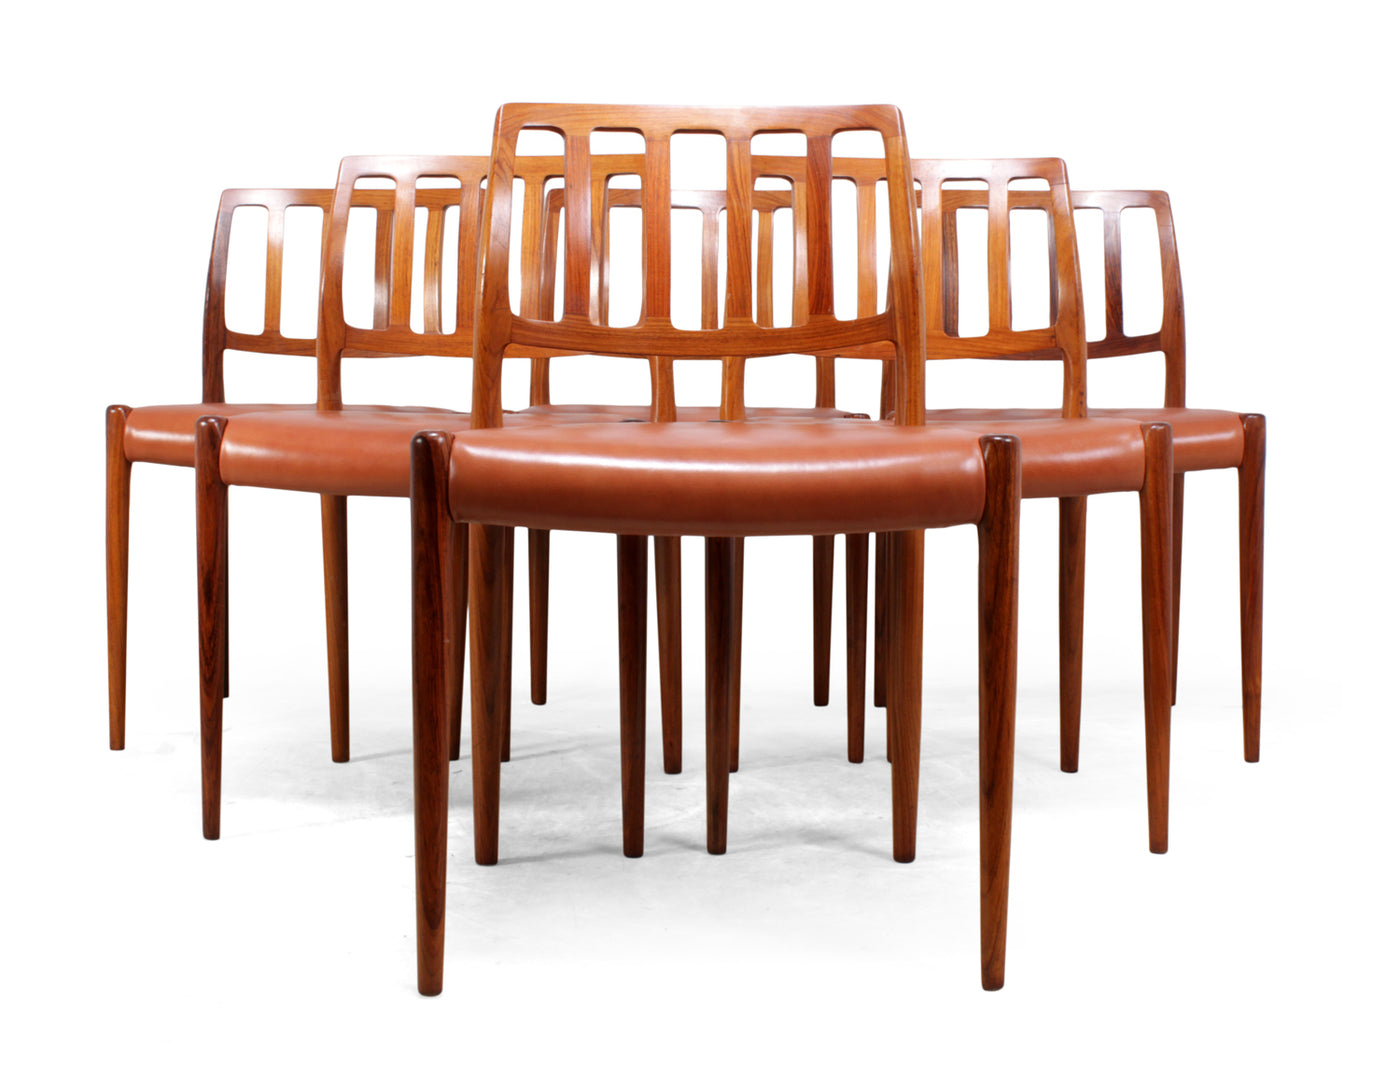 Mid Century Rosewood Dining Chairs by Moller model 83 This set of six model 83 dining chairs was designed by Niels O. Møller in Denmark, in 1974. they are in santos rosewood with new brown leather upholstery